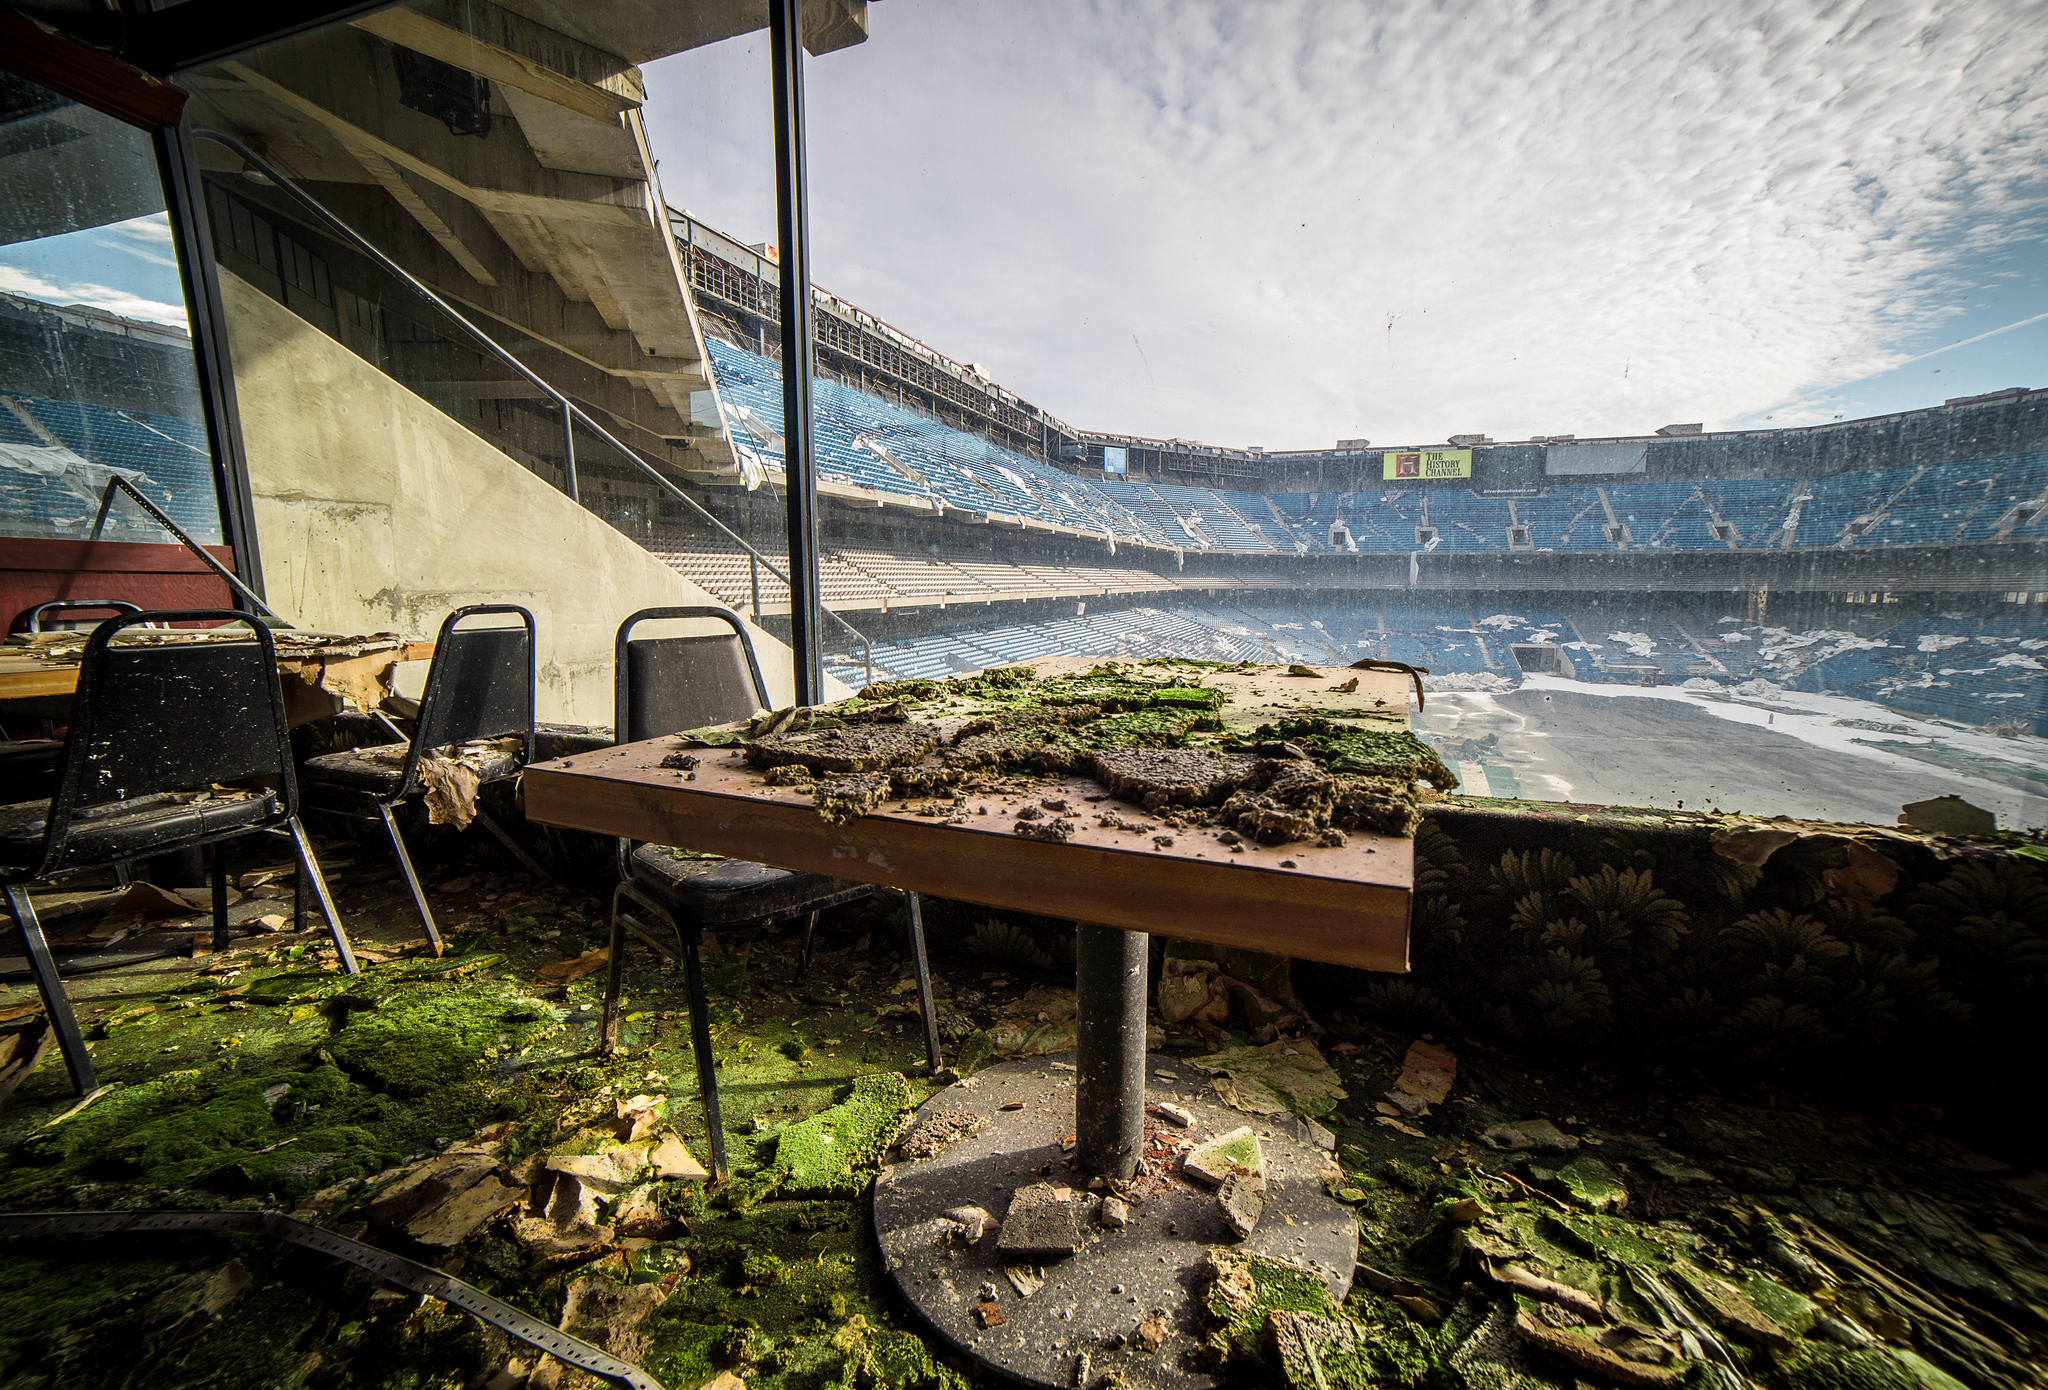 View from the Luxury box at the Pontiac Silverdome, Former Home to Detroit Lions.